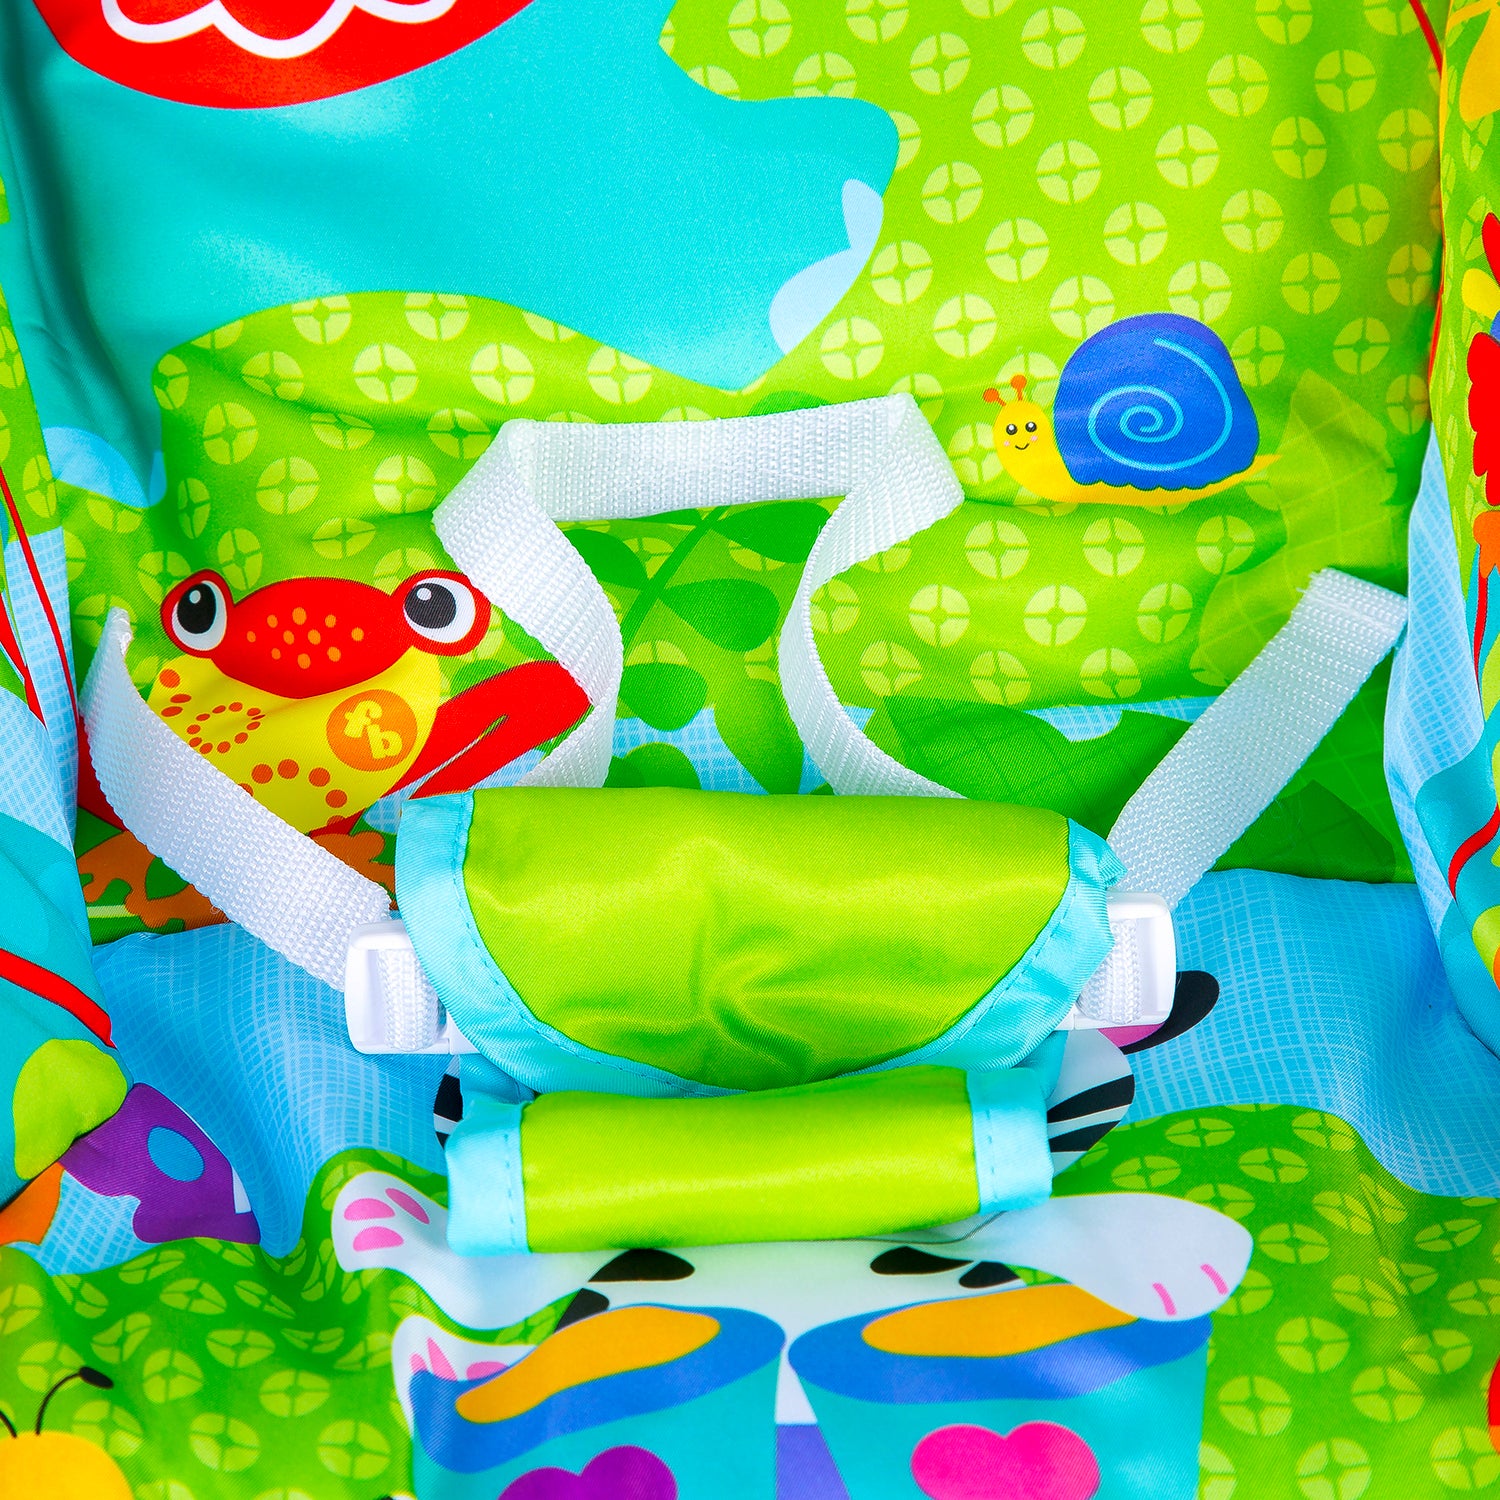 Newborn To Toddler Portable Bouncer With Hanging Toys Blue & Green